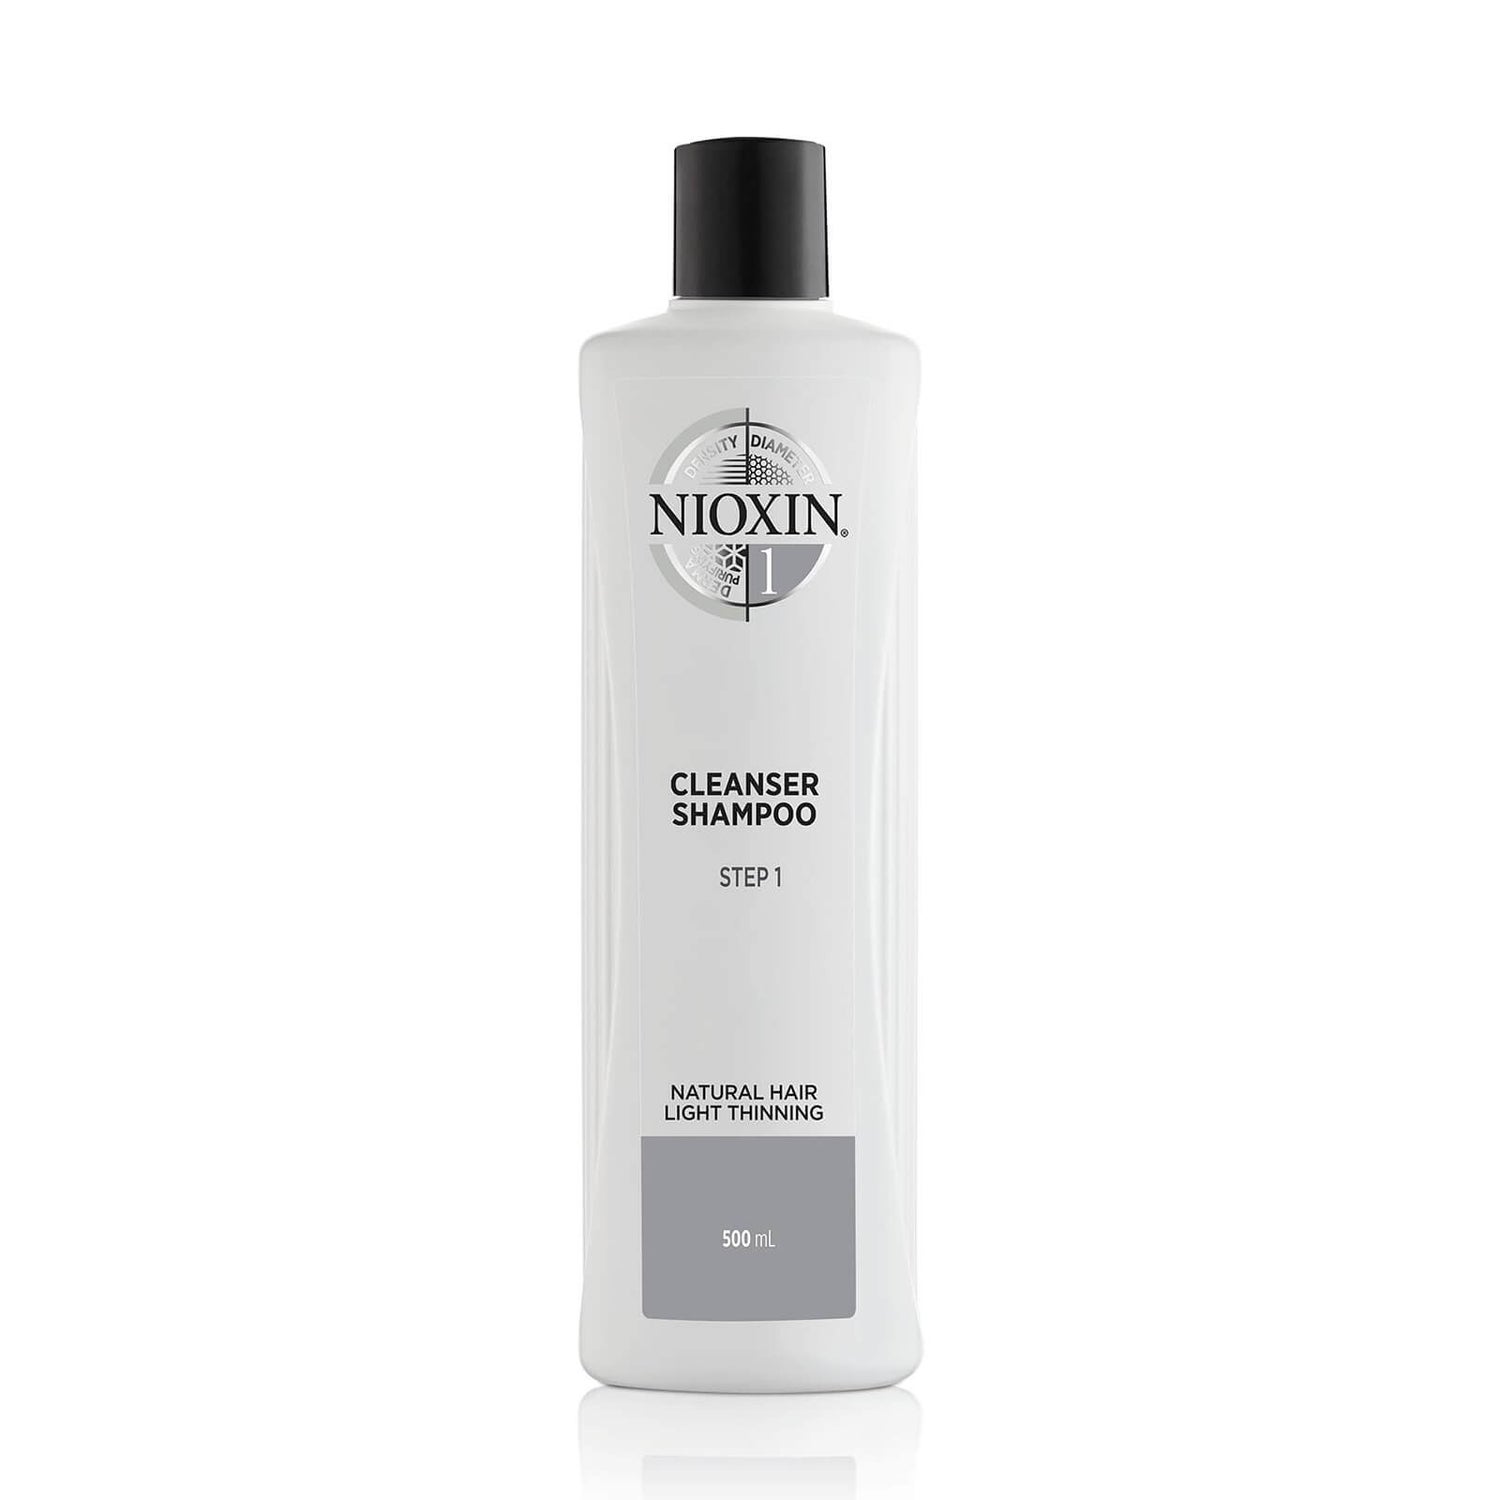 Nioxin System 2 Cleanser Shampoo for Natural Hair with Progressed Thinning 16.9 oz